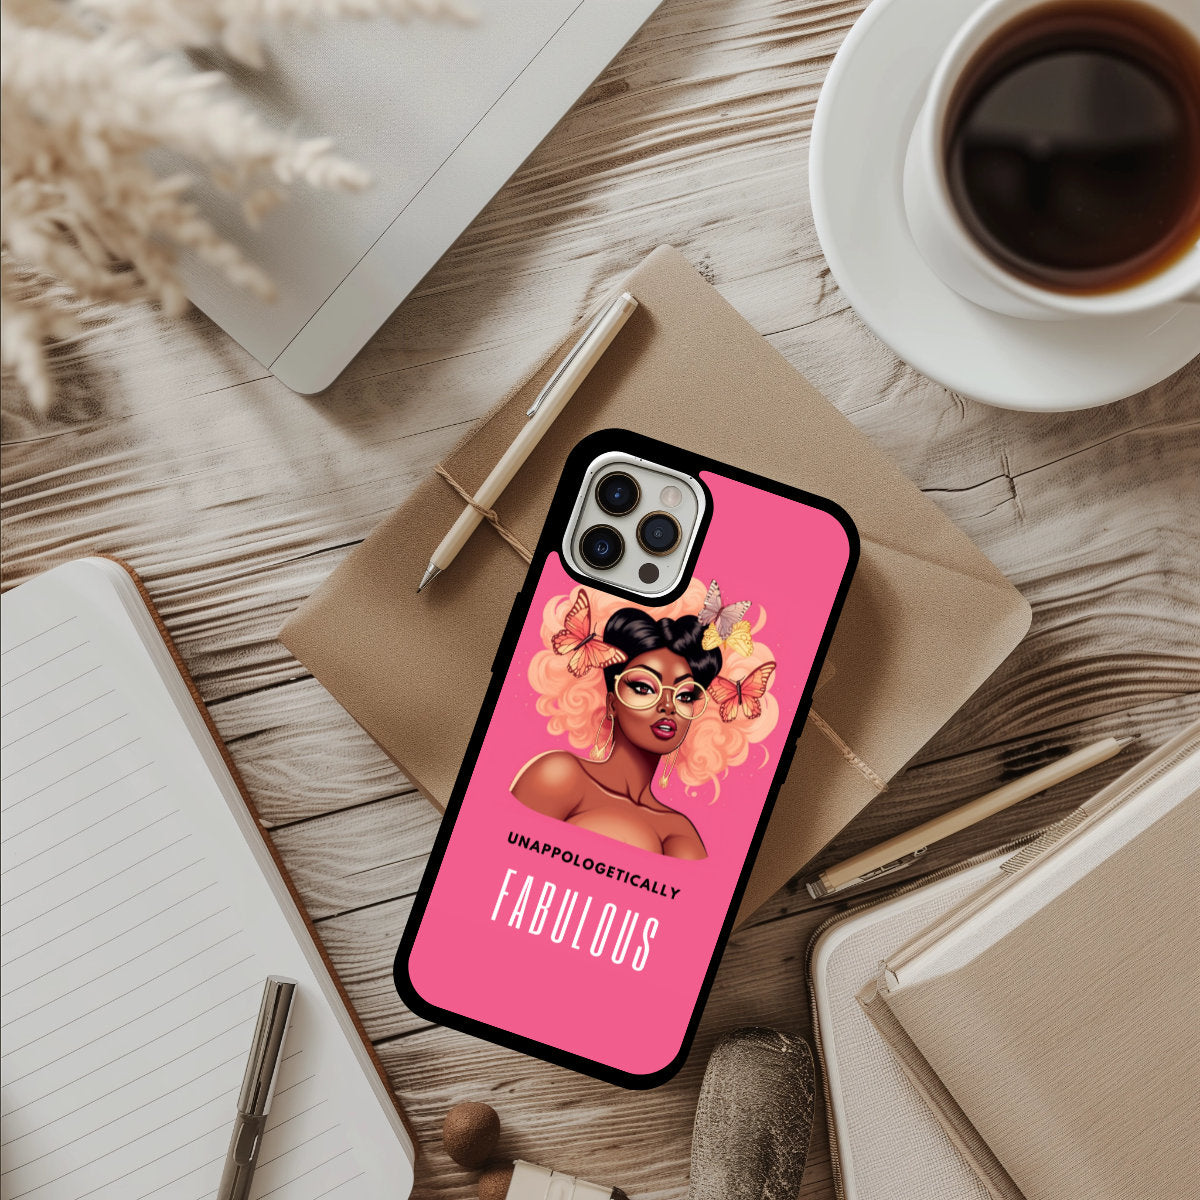 Boujee Pink Phone Case perfect gift for her - cute phone case - best birthday gift - iphone case - black girl phone case - butterfly case